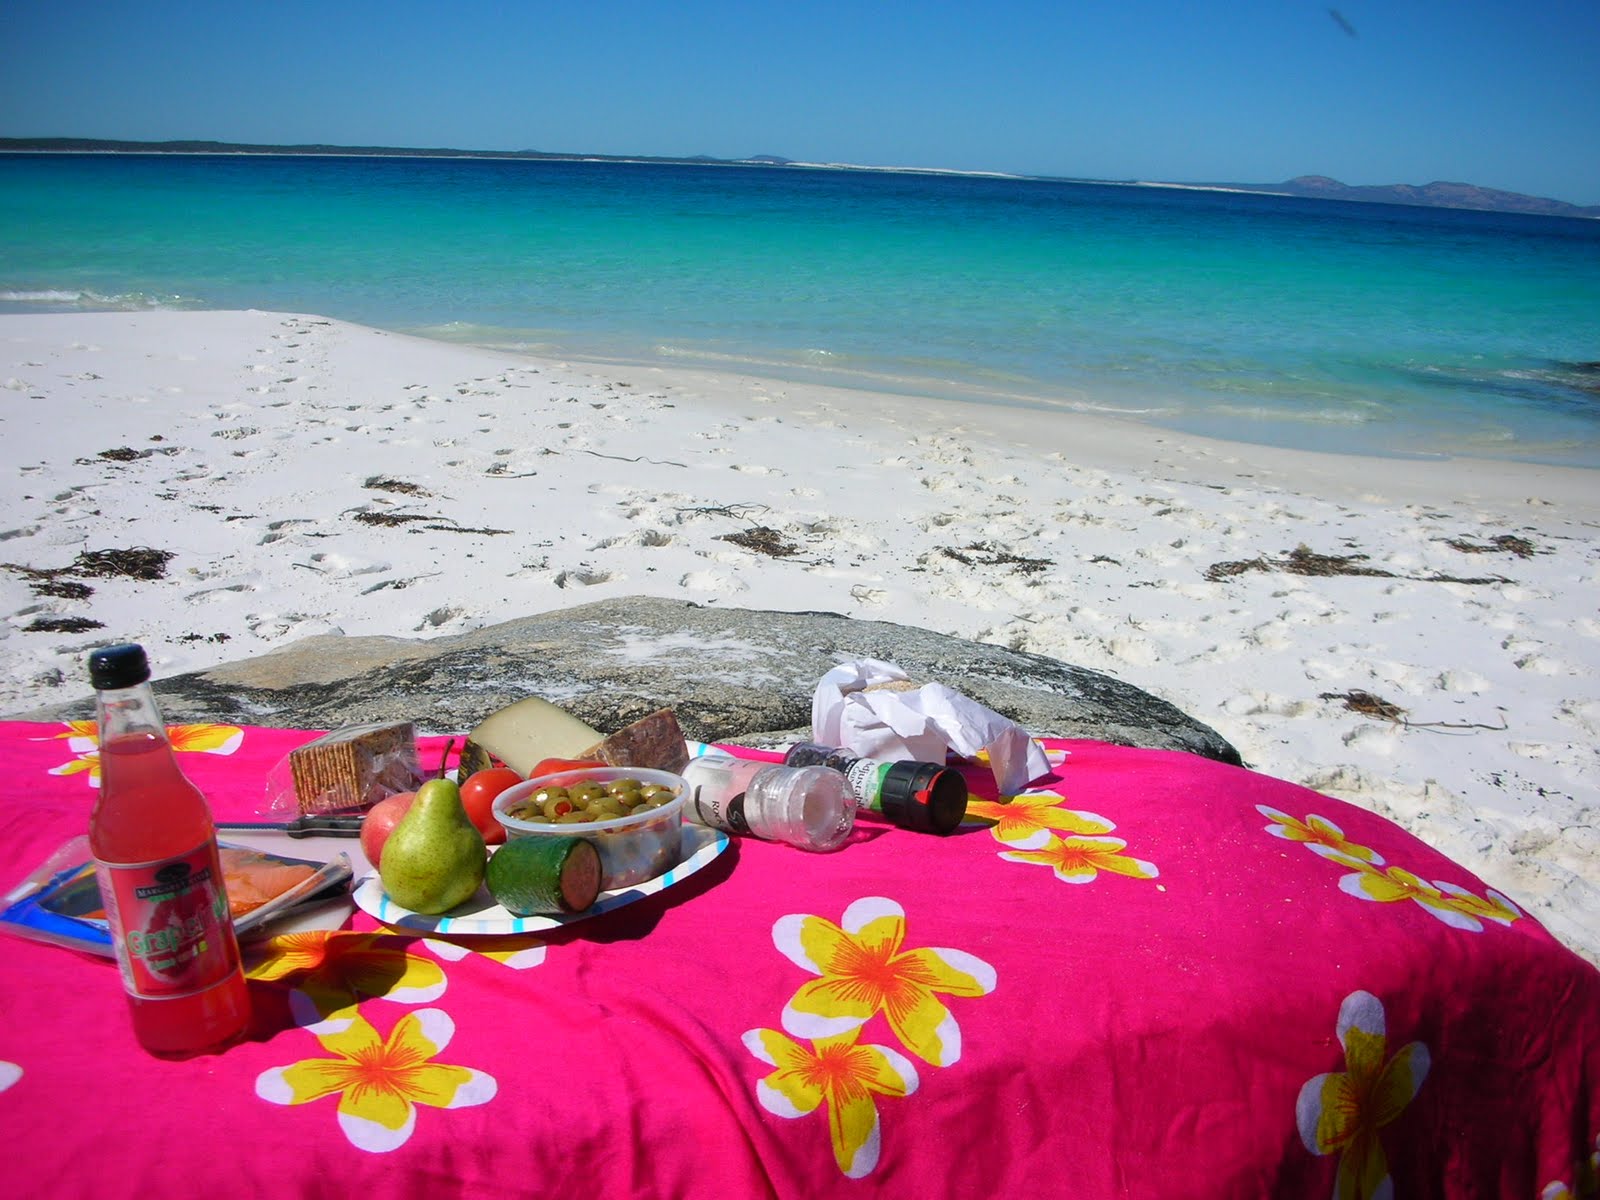 Esperance. Food, wine, snakes and beaches….